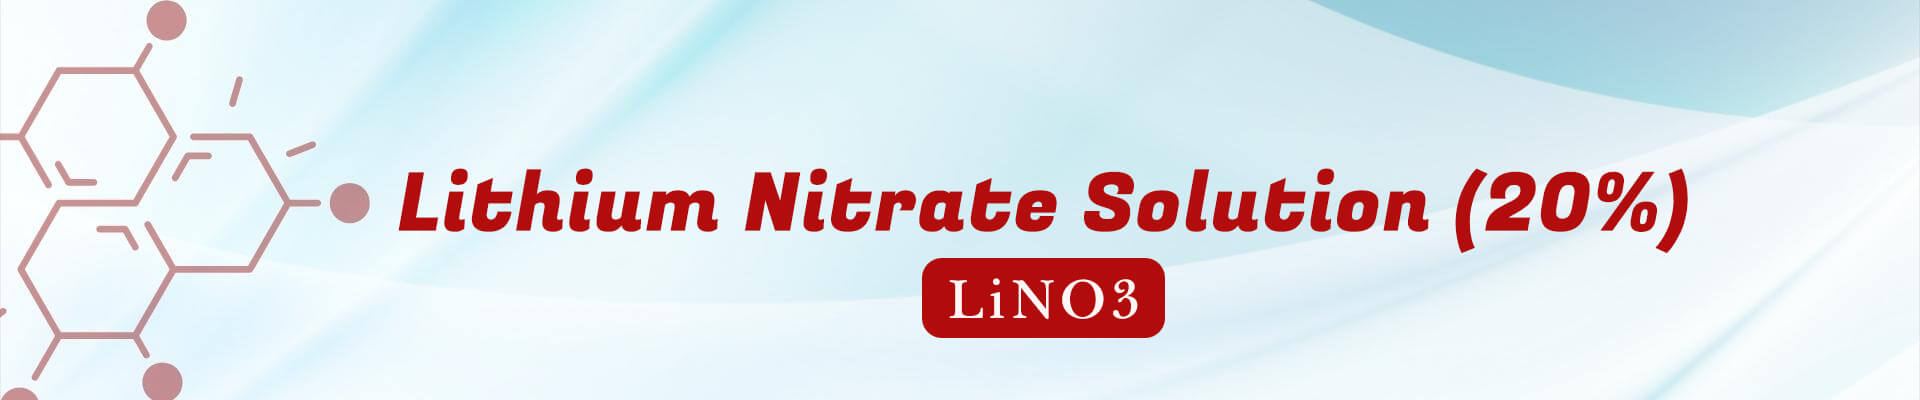 Lithium Nitrate Solution